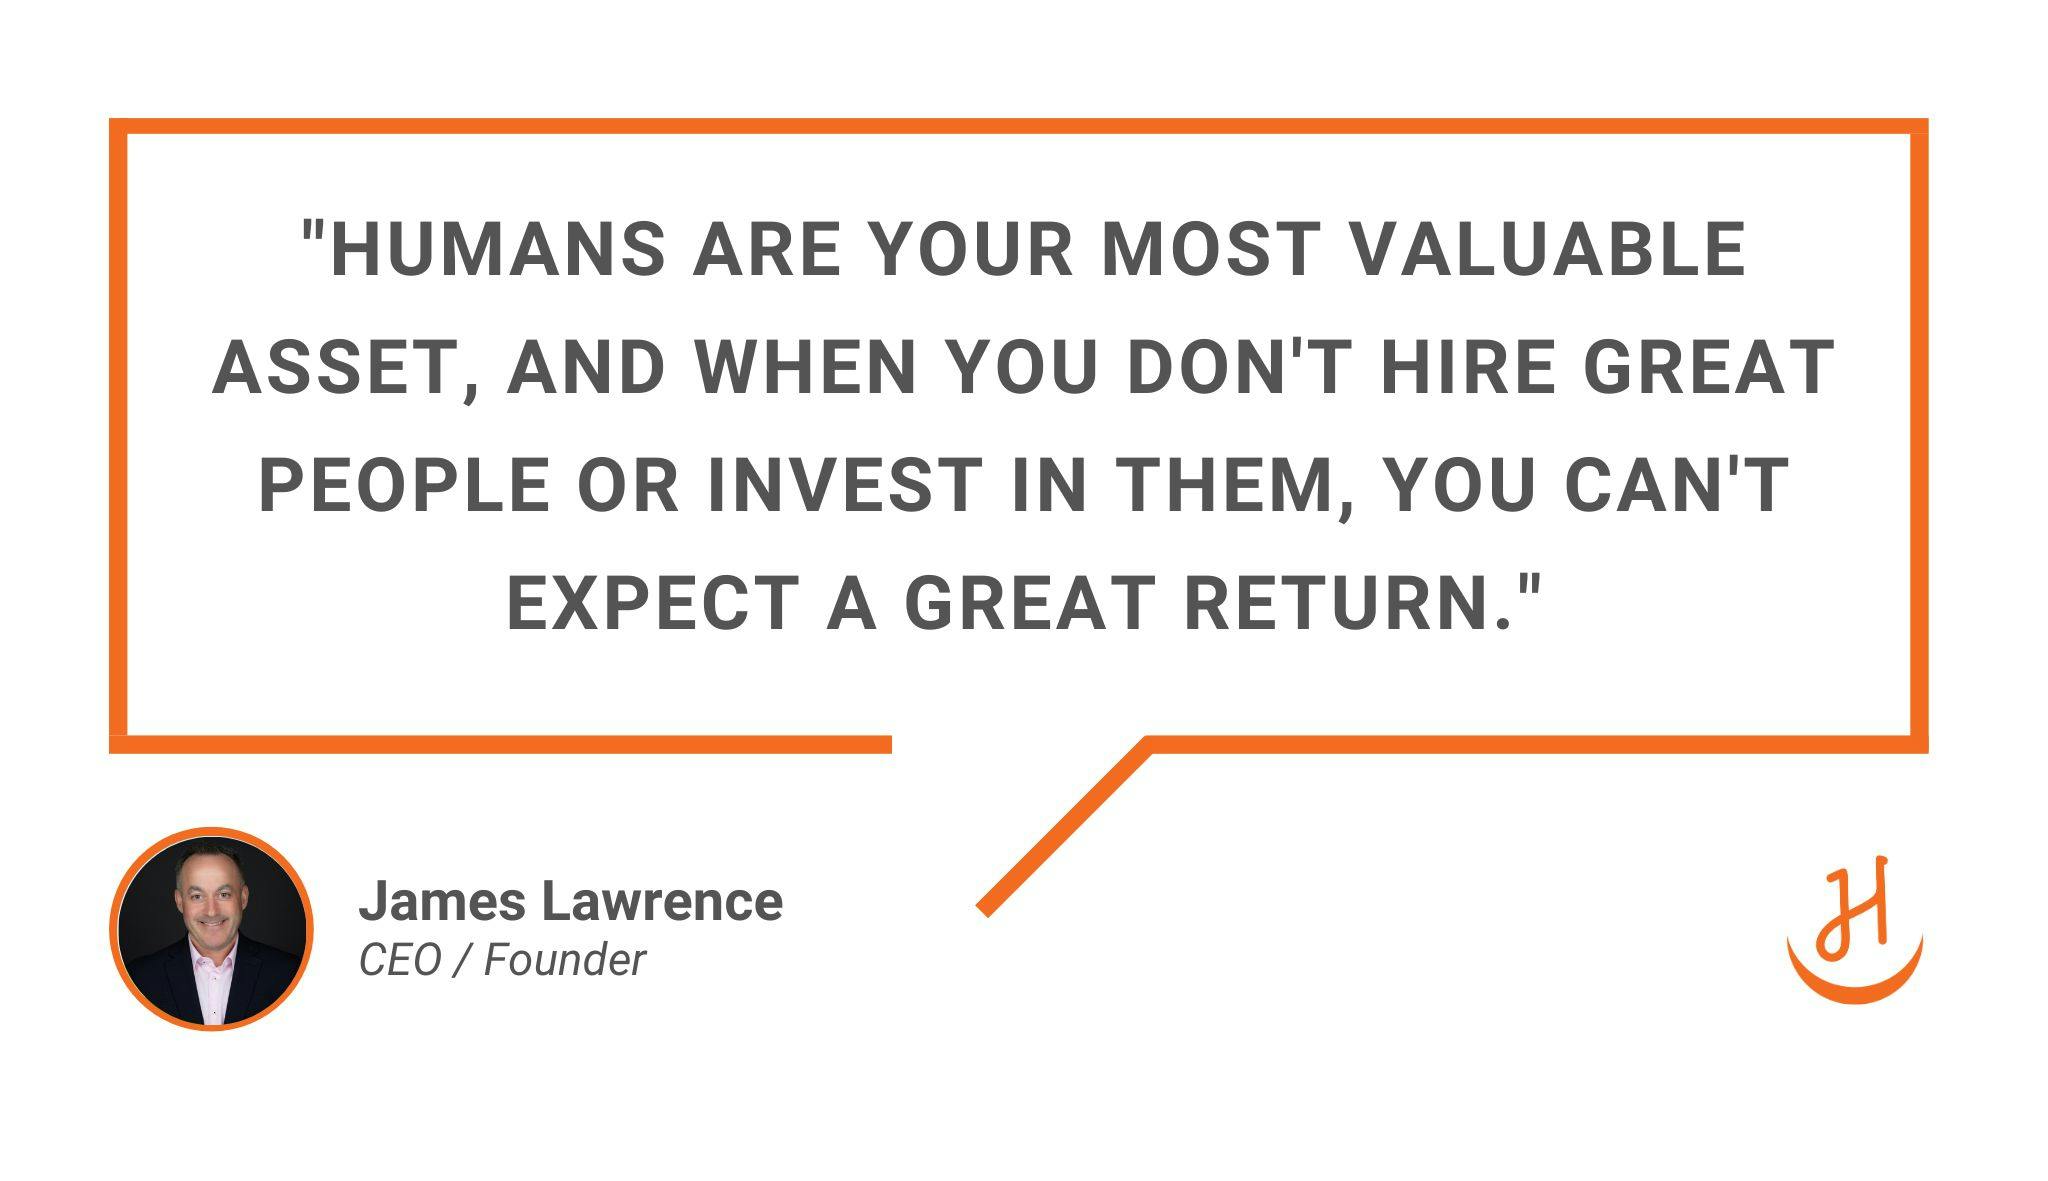 Quote by James Lawrence: "Humans are your most valuable asset and when you don't hire great people to invest in, you can't expect."